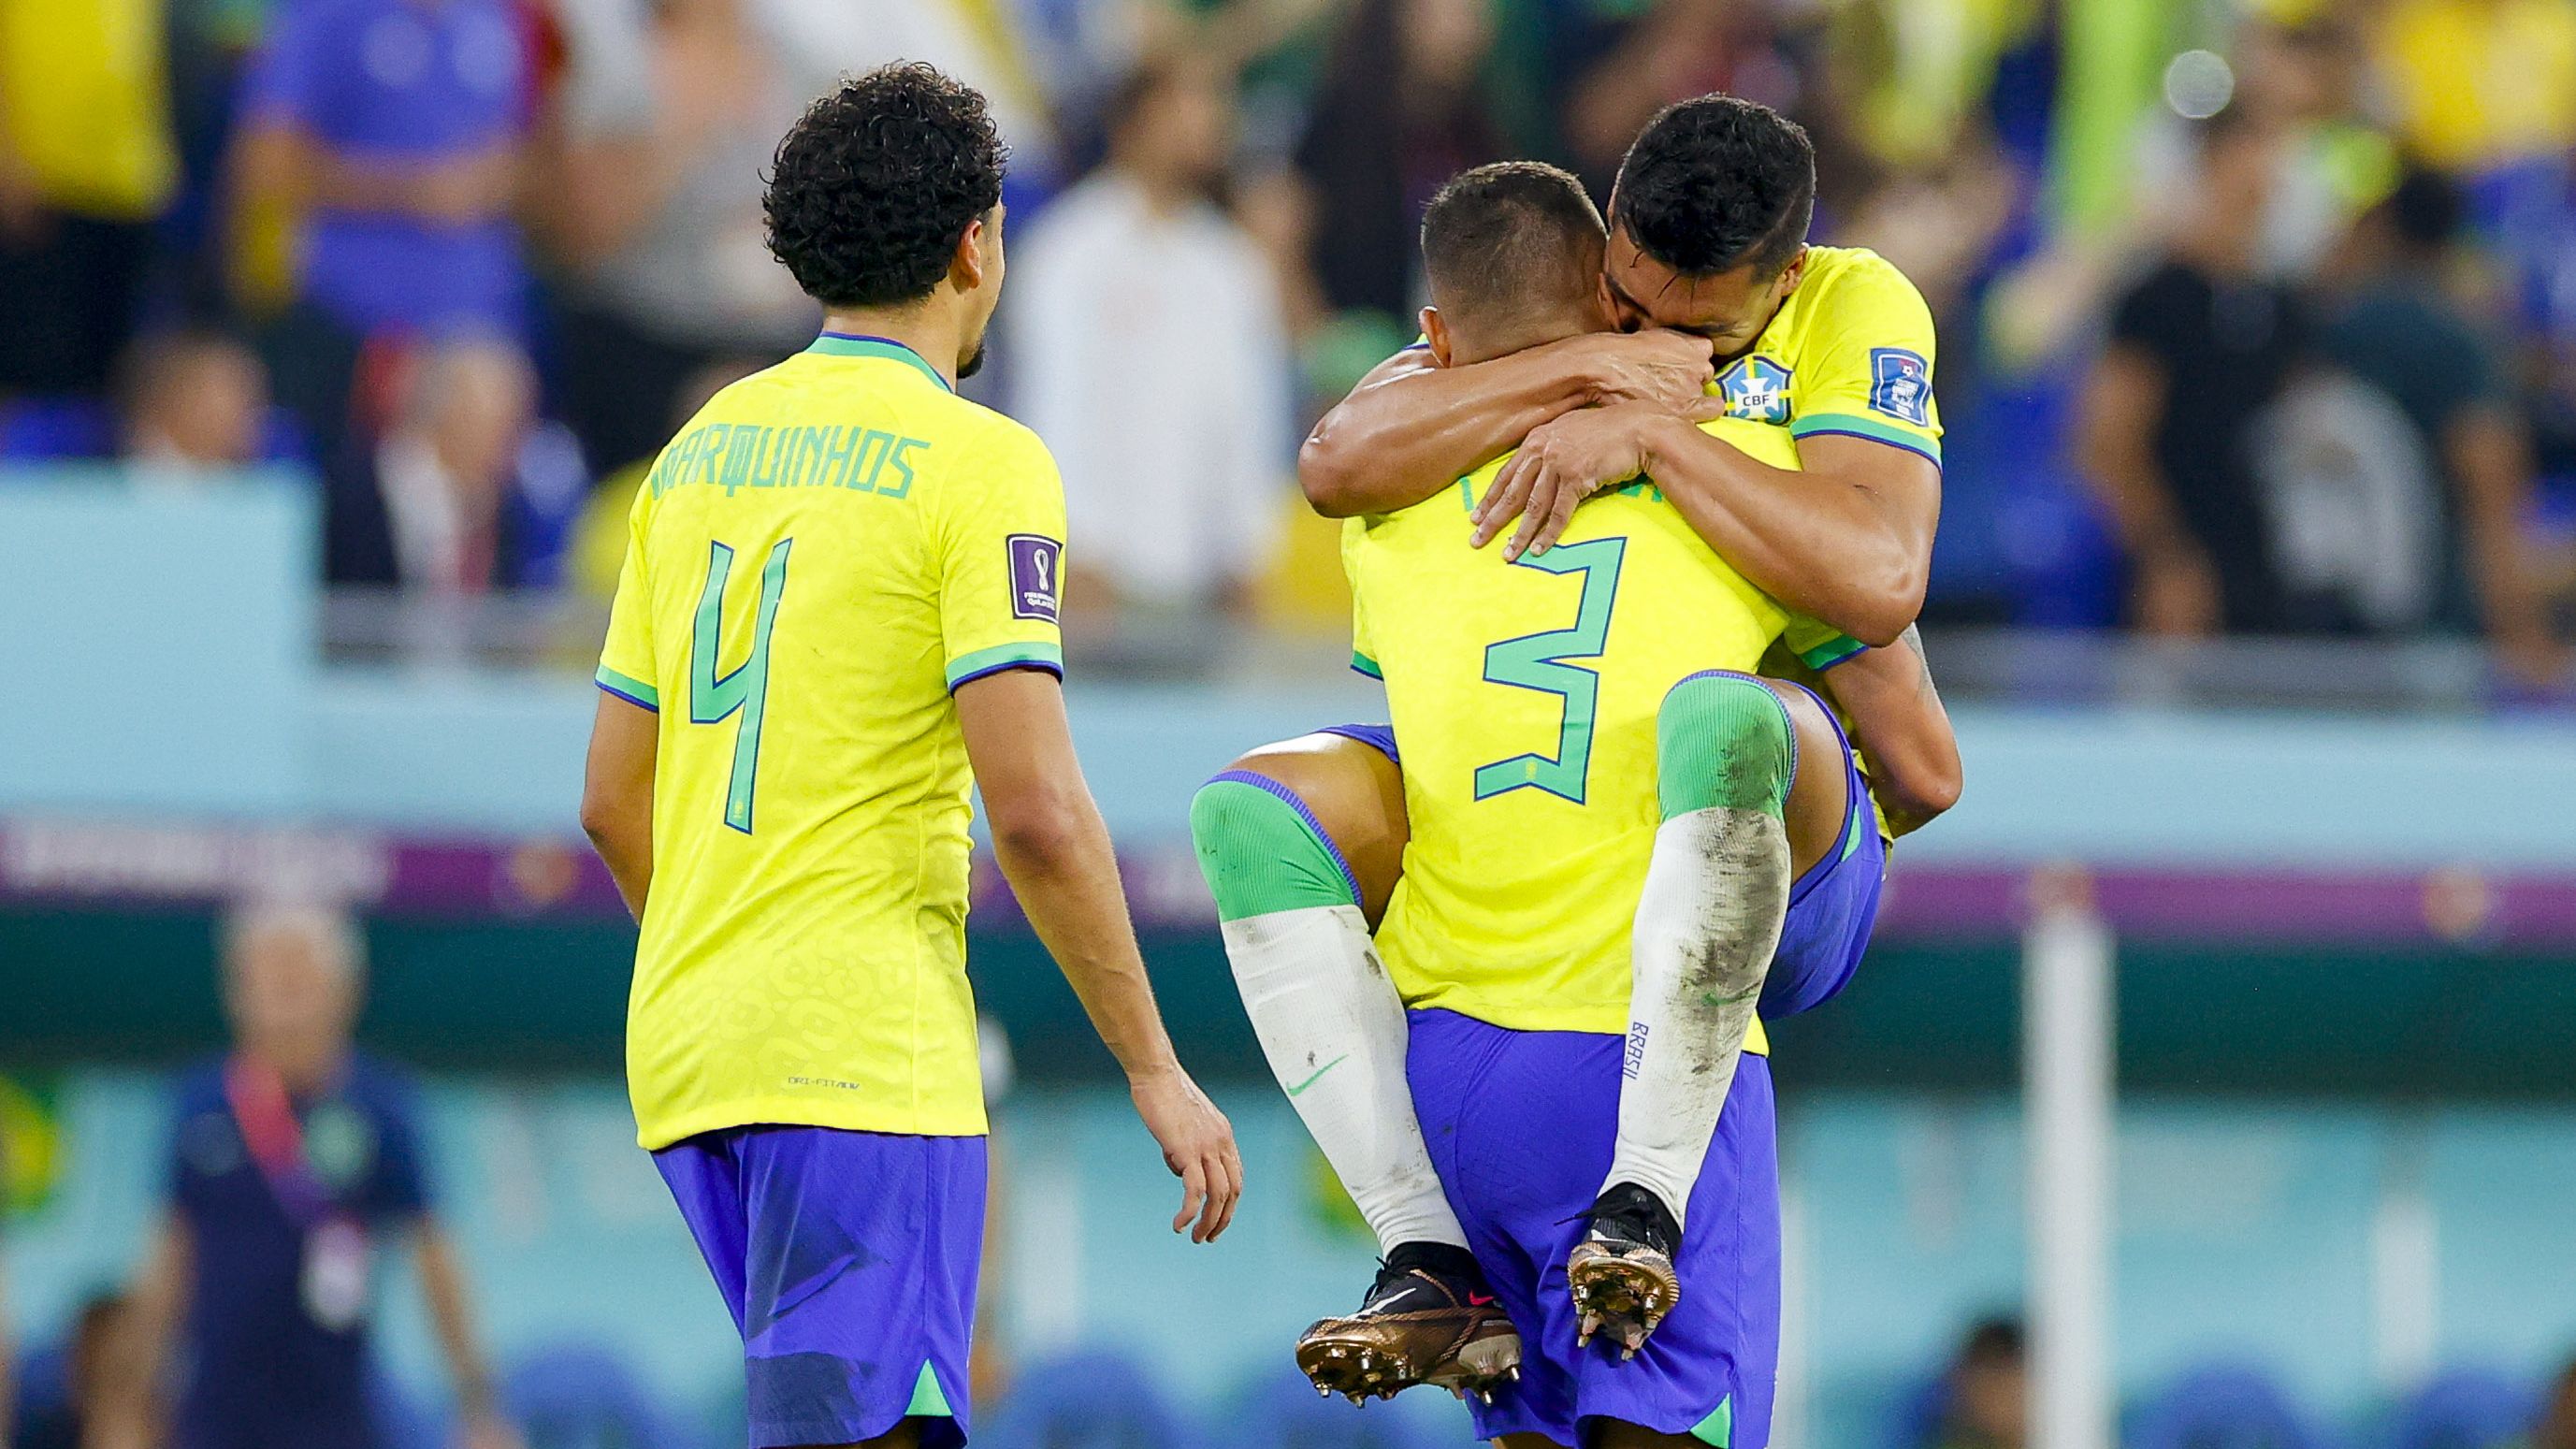 Brazil books spot in knockout stages despite scratchy performance in Neymar's absence